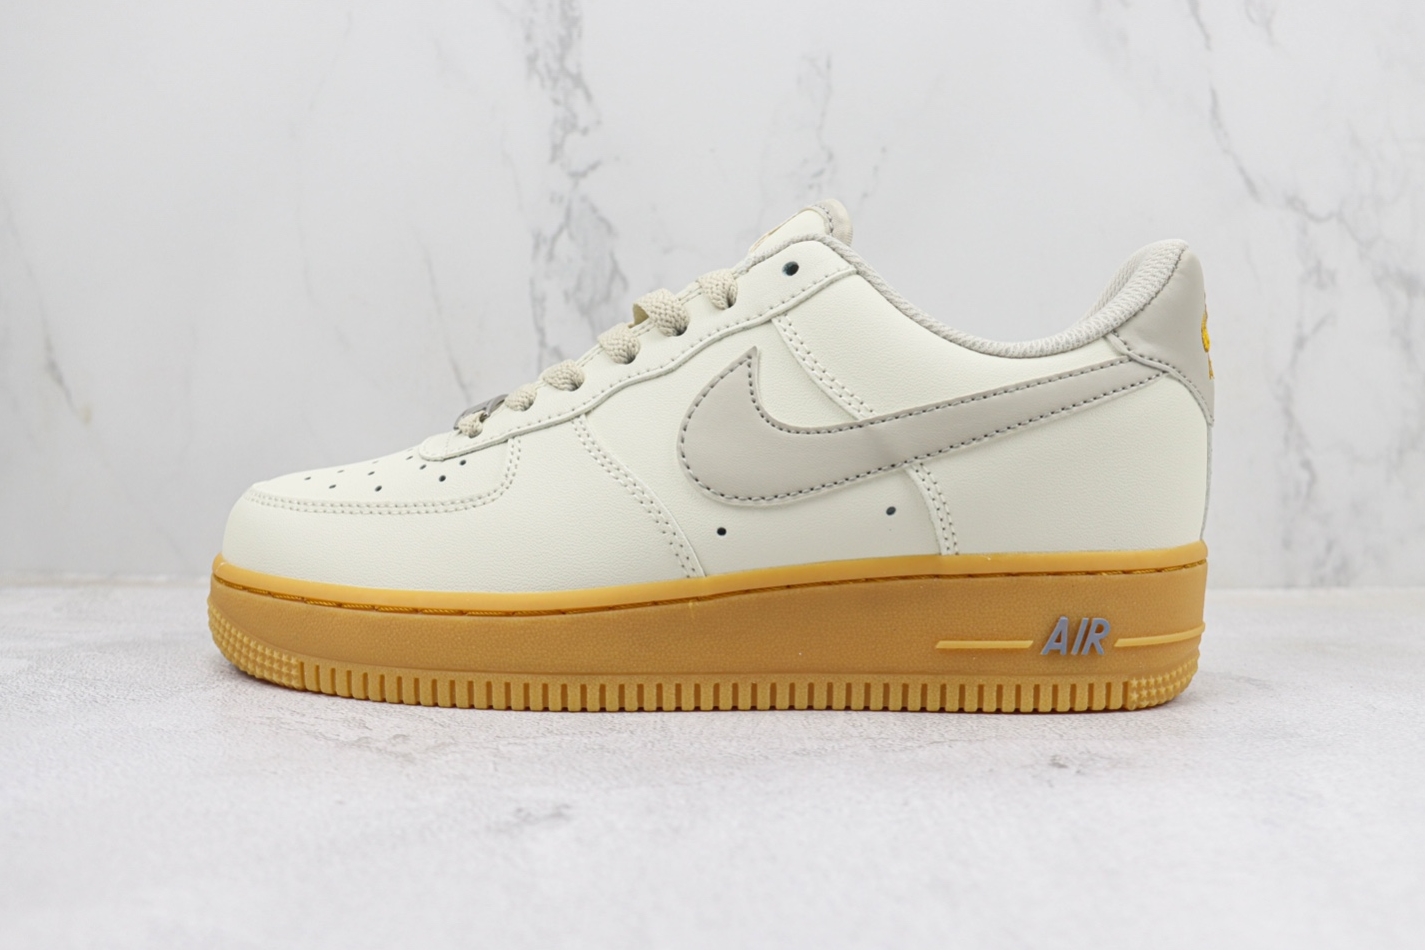 Nike Air Force 1 07 Low Light Grey Gum Gold XC2351-066 - Iconic Style and Supreme Comfort